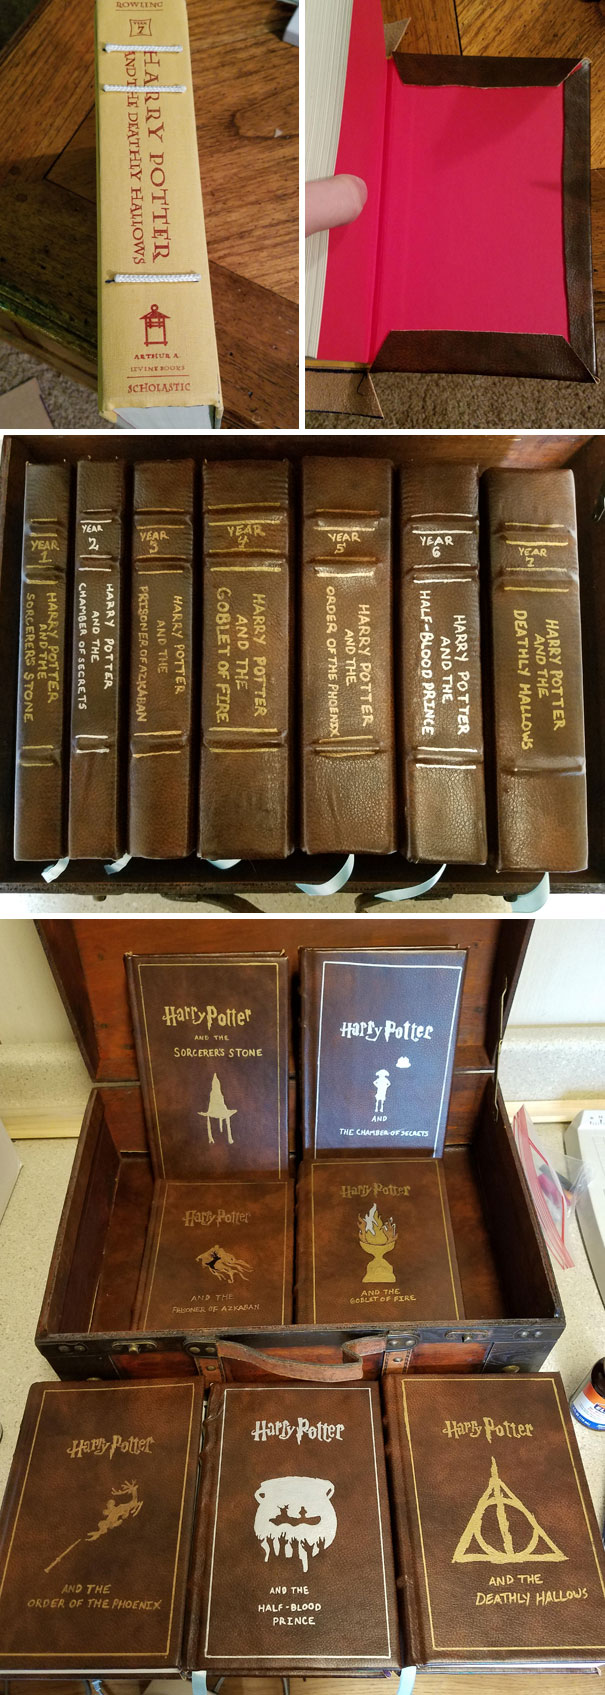 Made Leather Bound Copies Of The Harry Potter Books For My Wife For Christmas